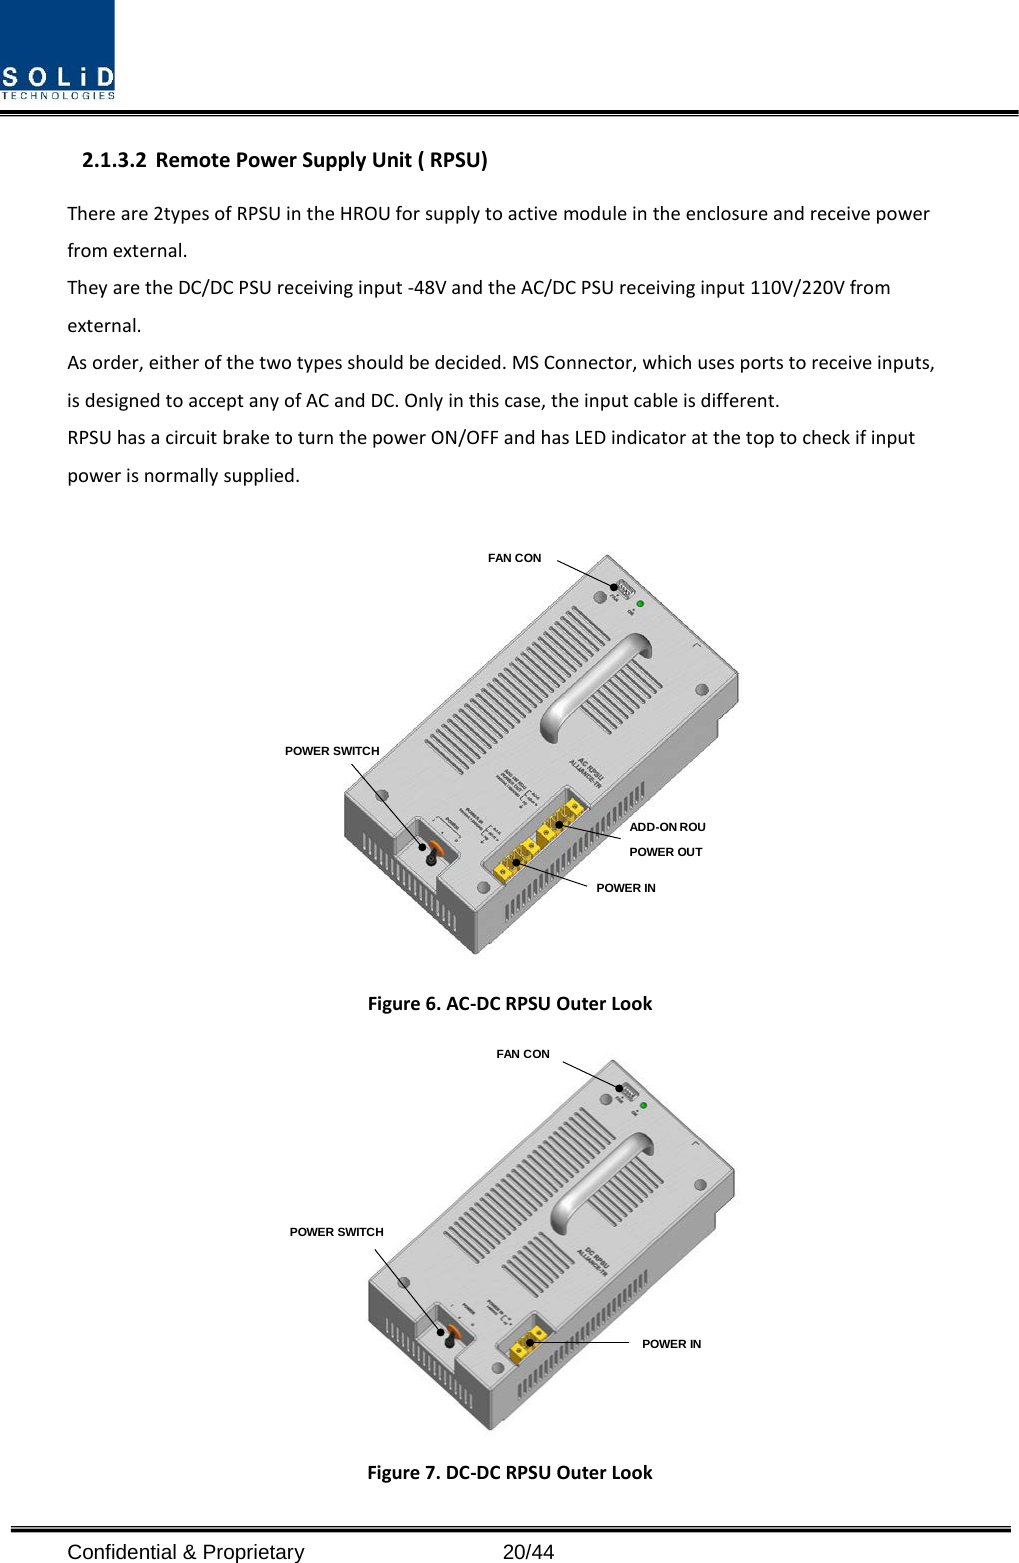  Confidential &amp; Proprietary                   20/44 2.1.3.2 Remote Power Supply Unit ( RPSU) There are 2types of RPSU in the HROU for supply to active module in the enclosure and receive power from external.   They are the DC/DC PSU receiving input -48V and the AC/DC PSU receiving input 110V/220V from external. As order, either of the two types should be decided. MS Connector, which uses ports to receive inputs, is designed to accept any of AC and DC. Only in this case, the input cable is different. RPSU has a circuit brake to turn the power ON/OFF and has LED indicator at the top to check if input power is normally supplied.   Figure 6. AC-DC RPSU Outer Look  Figure 7. DC-DC RPSU Outer Look POWER SWITCHFAN CONPOWER INADD-ON ROU POWER OUTPOWER INPOWER SWITCHFAN CON